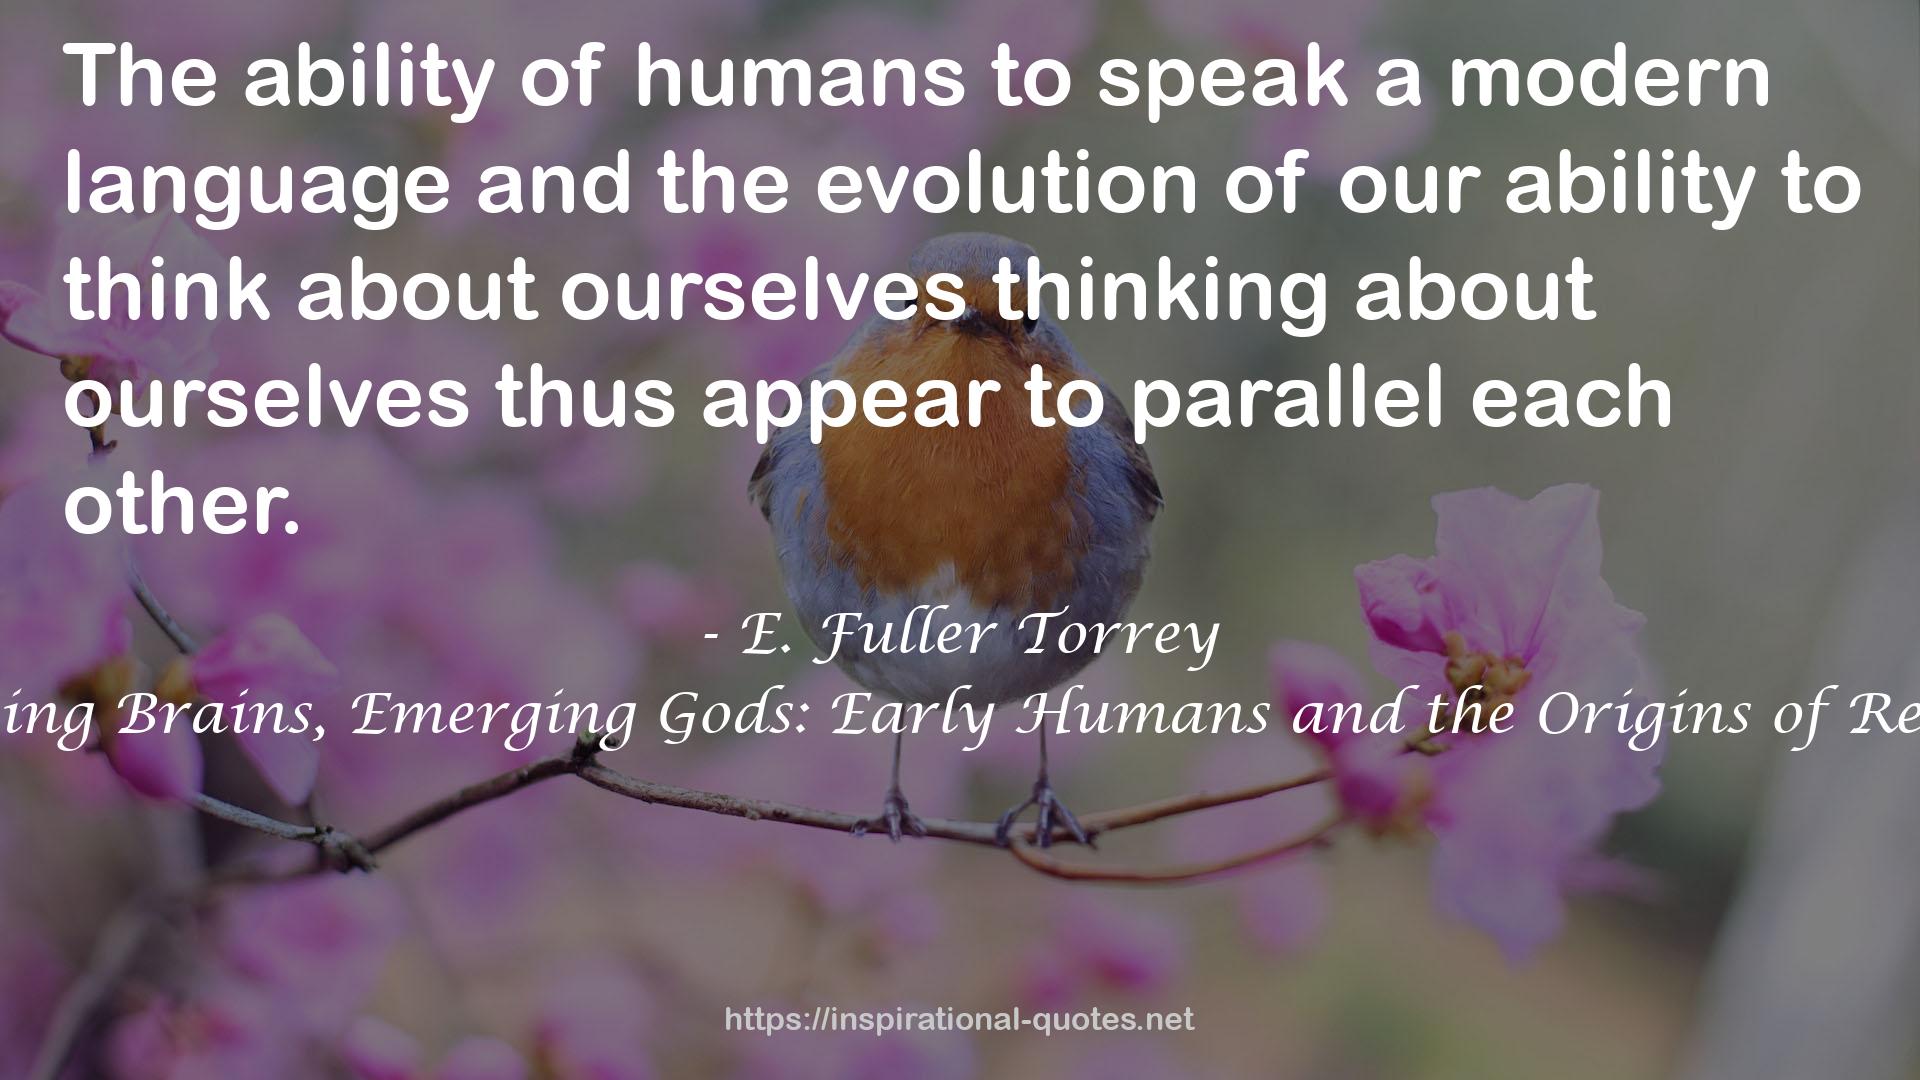 Evolving Brains, Emerging Gods: Early Humans and the Origins of Religion QUOTES